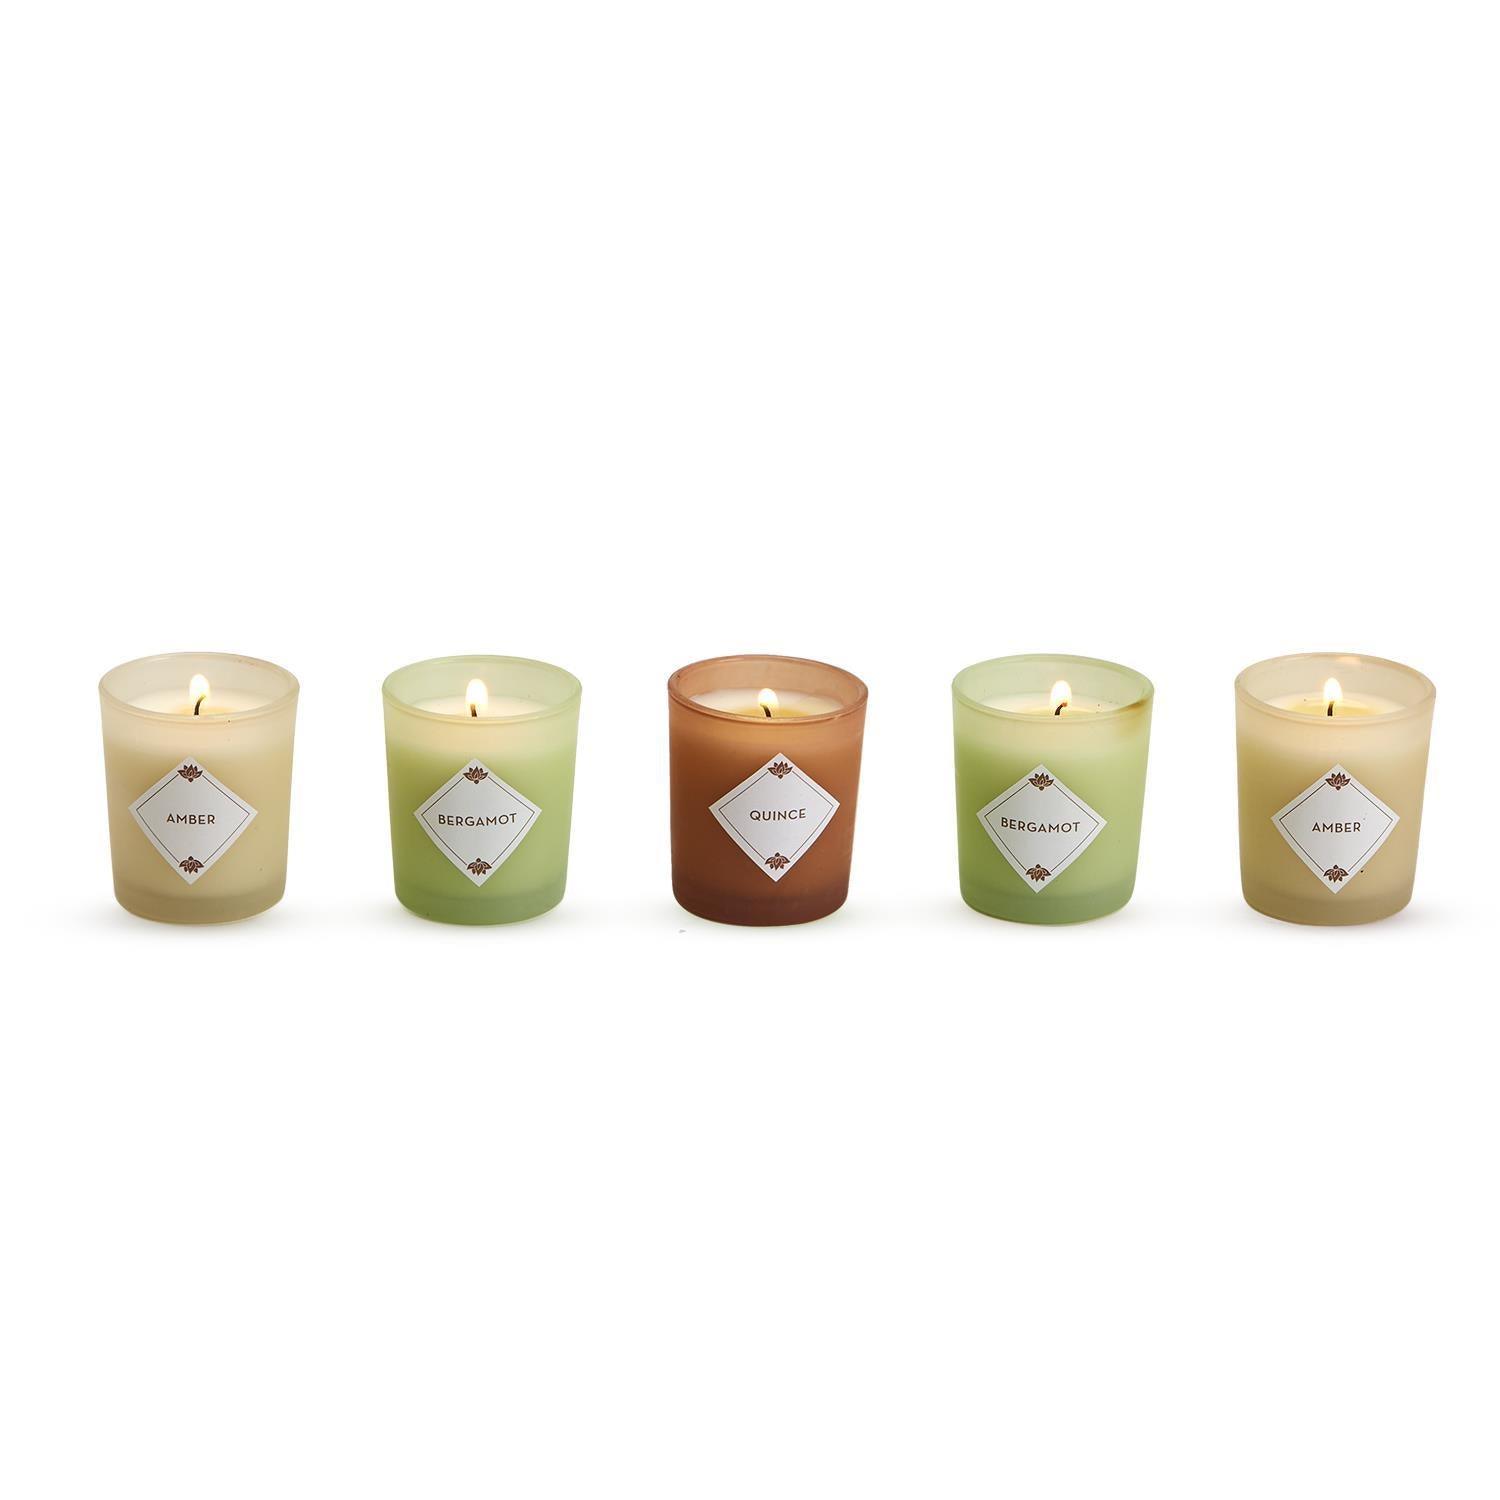 Nature Walk Set of 5 Scented Candles in Gift Box - Elegant Linen